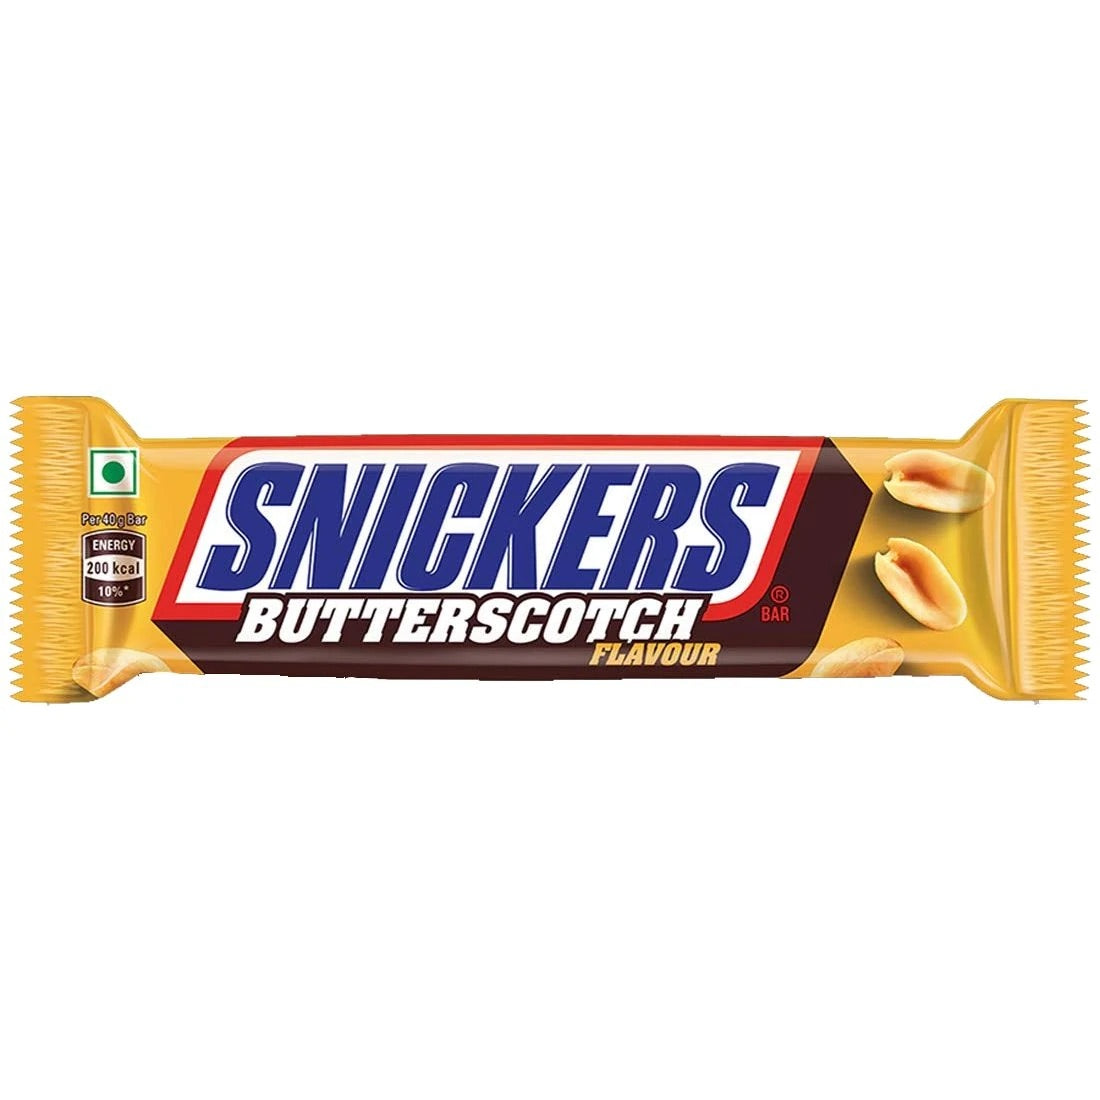 Snickers Butterscotch 22g (India)